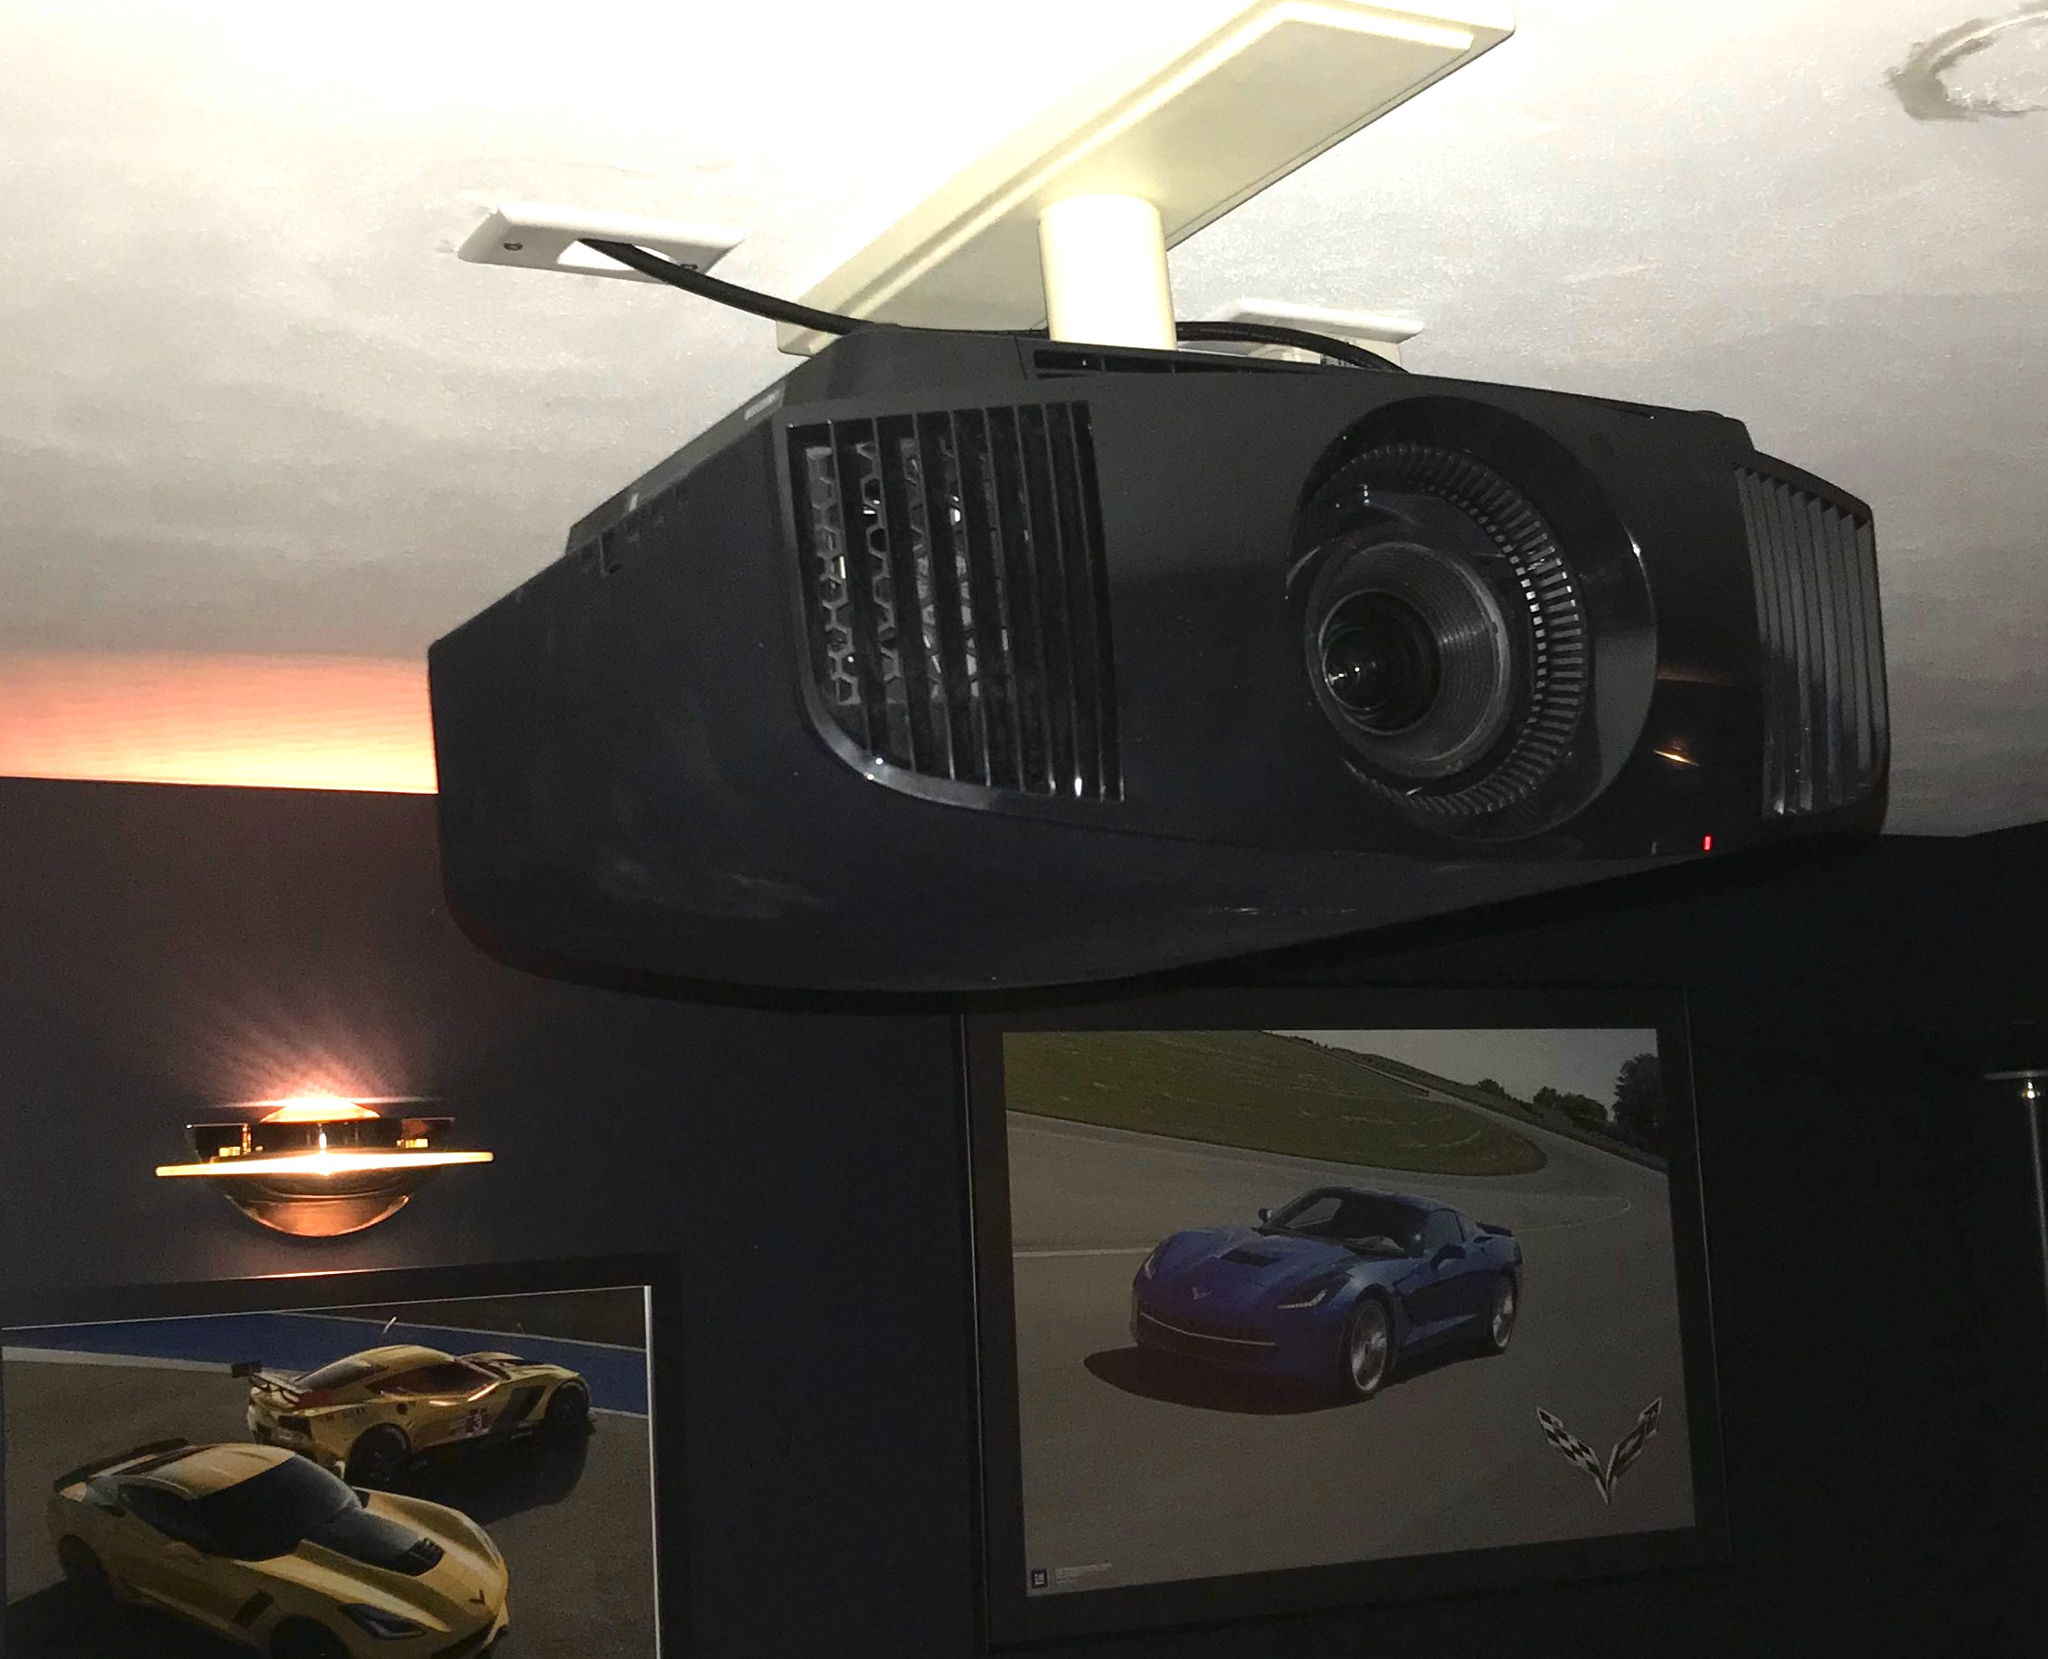 Sony Projector and Corvette Pictures